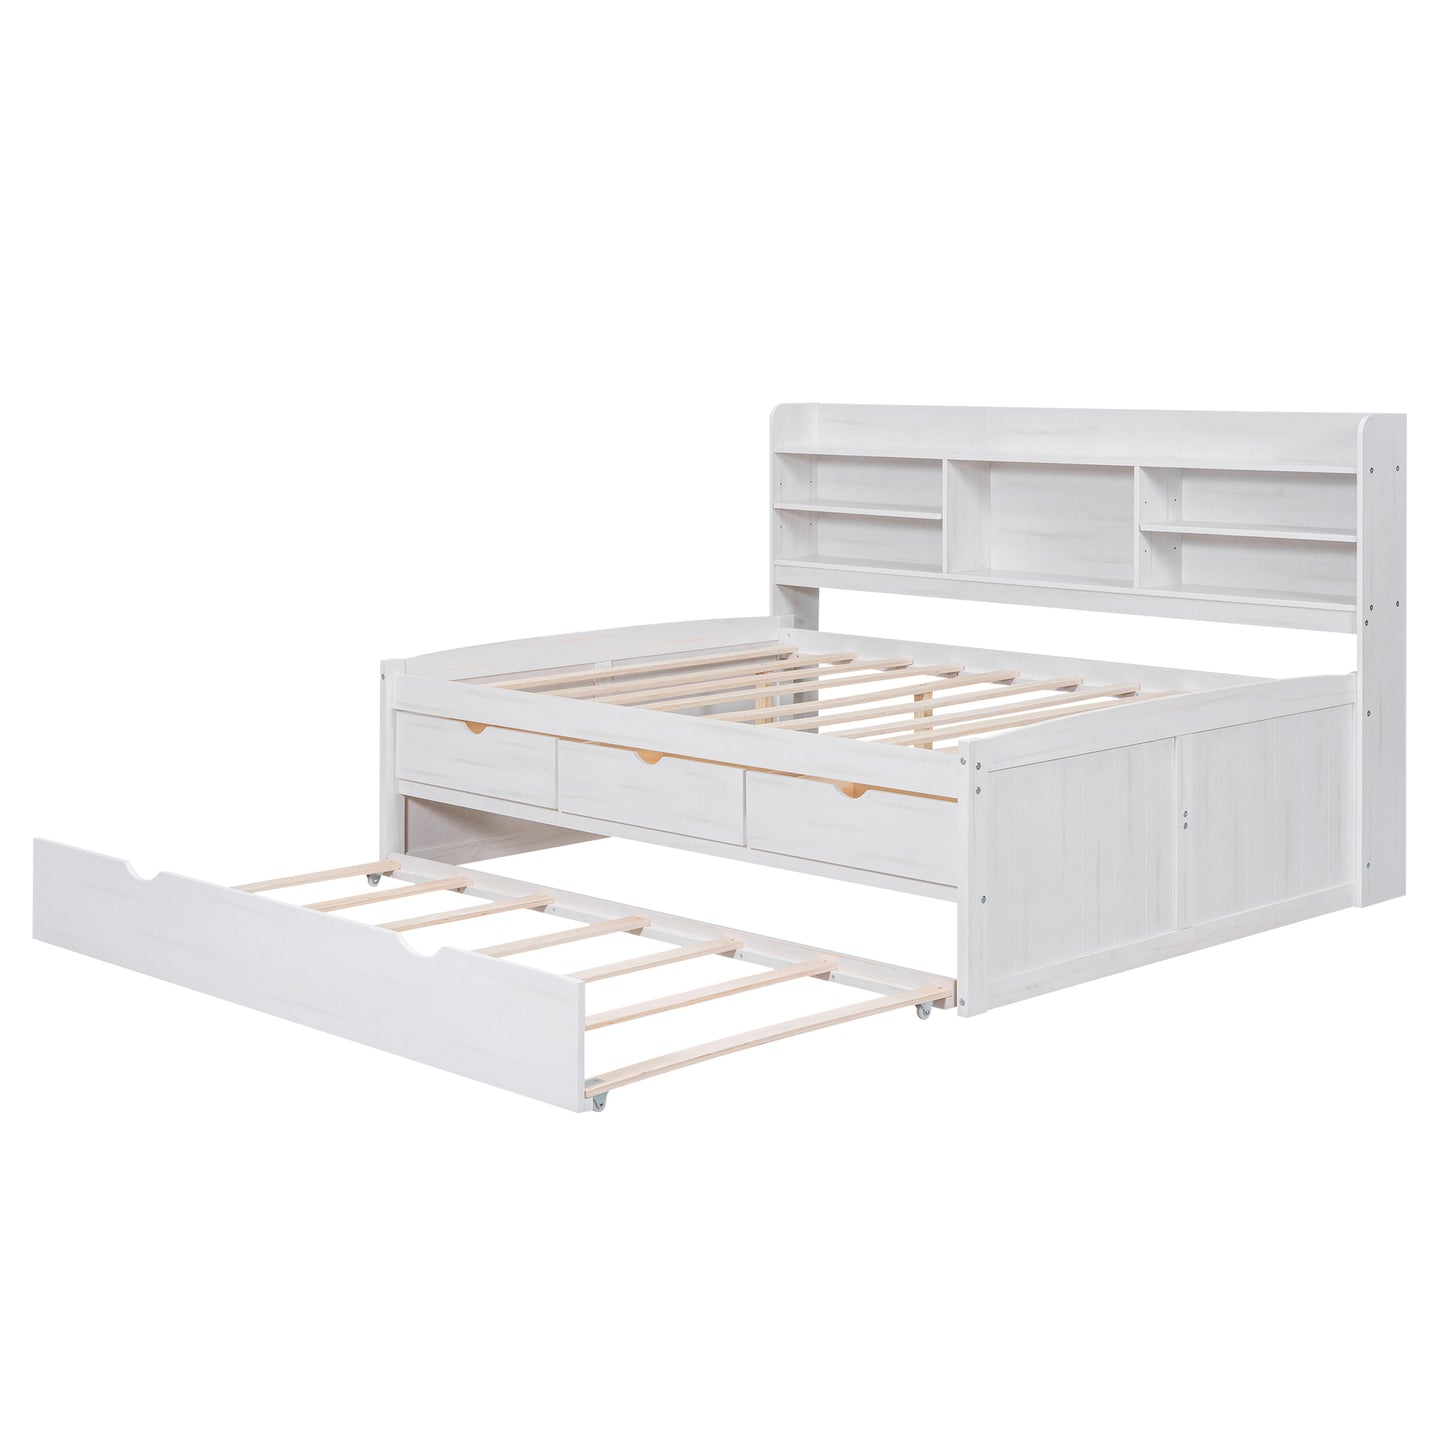 Full Size Wooden Captain Platform Bed with Built-in Bookshelves,Three Storage Drawers and Trundle,White